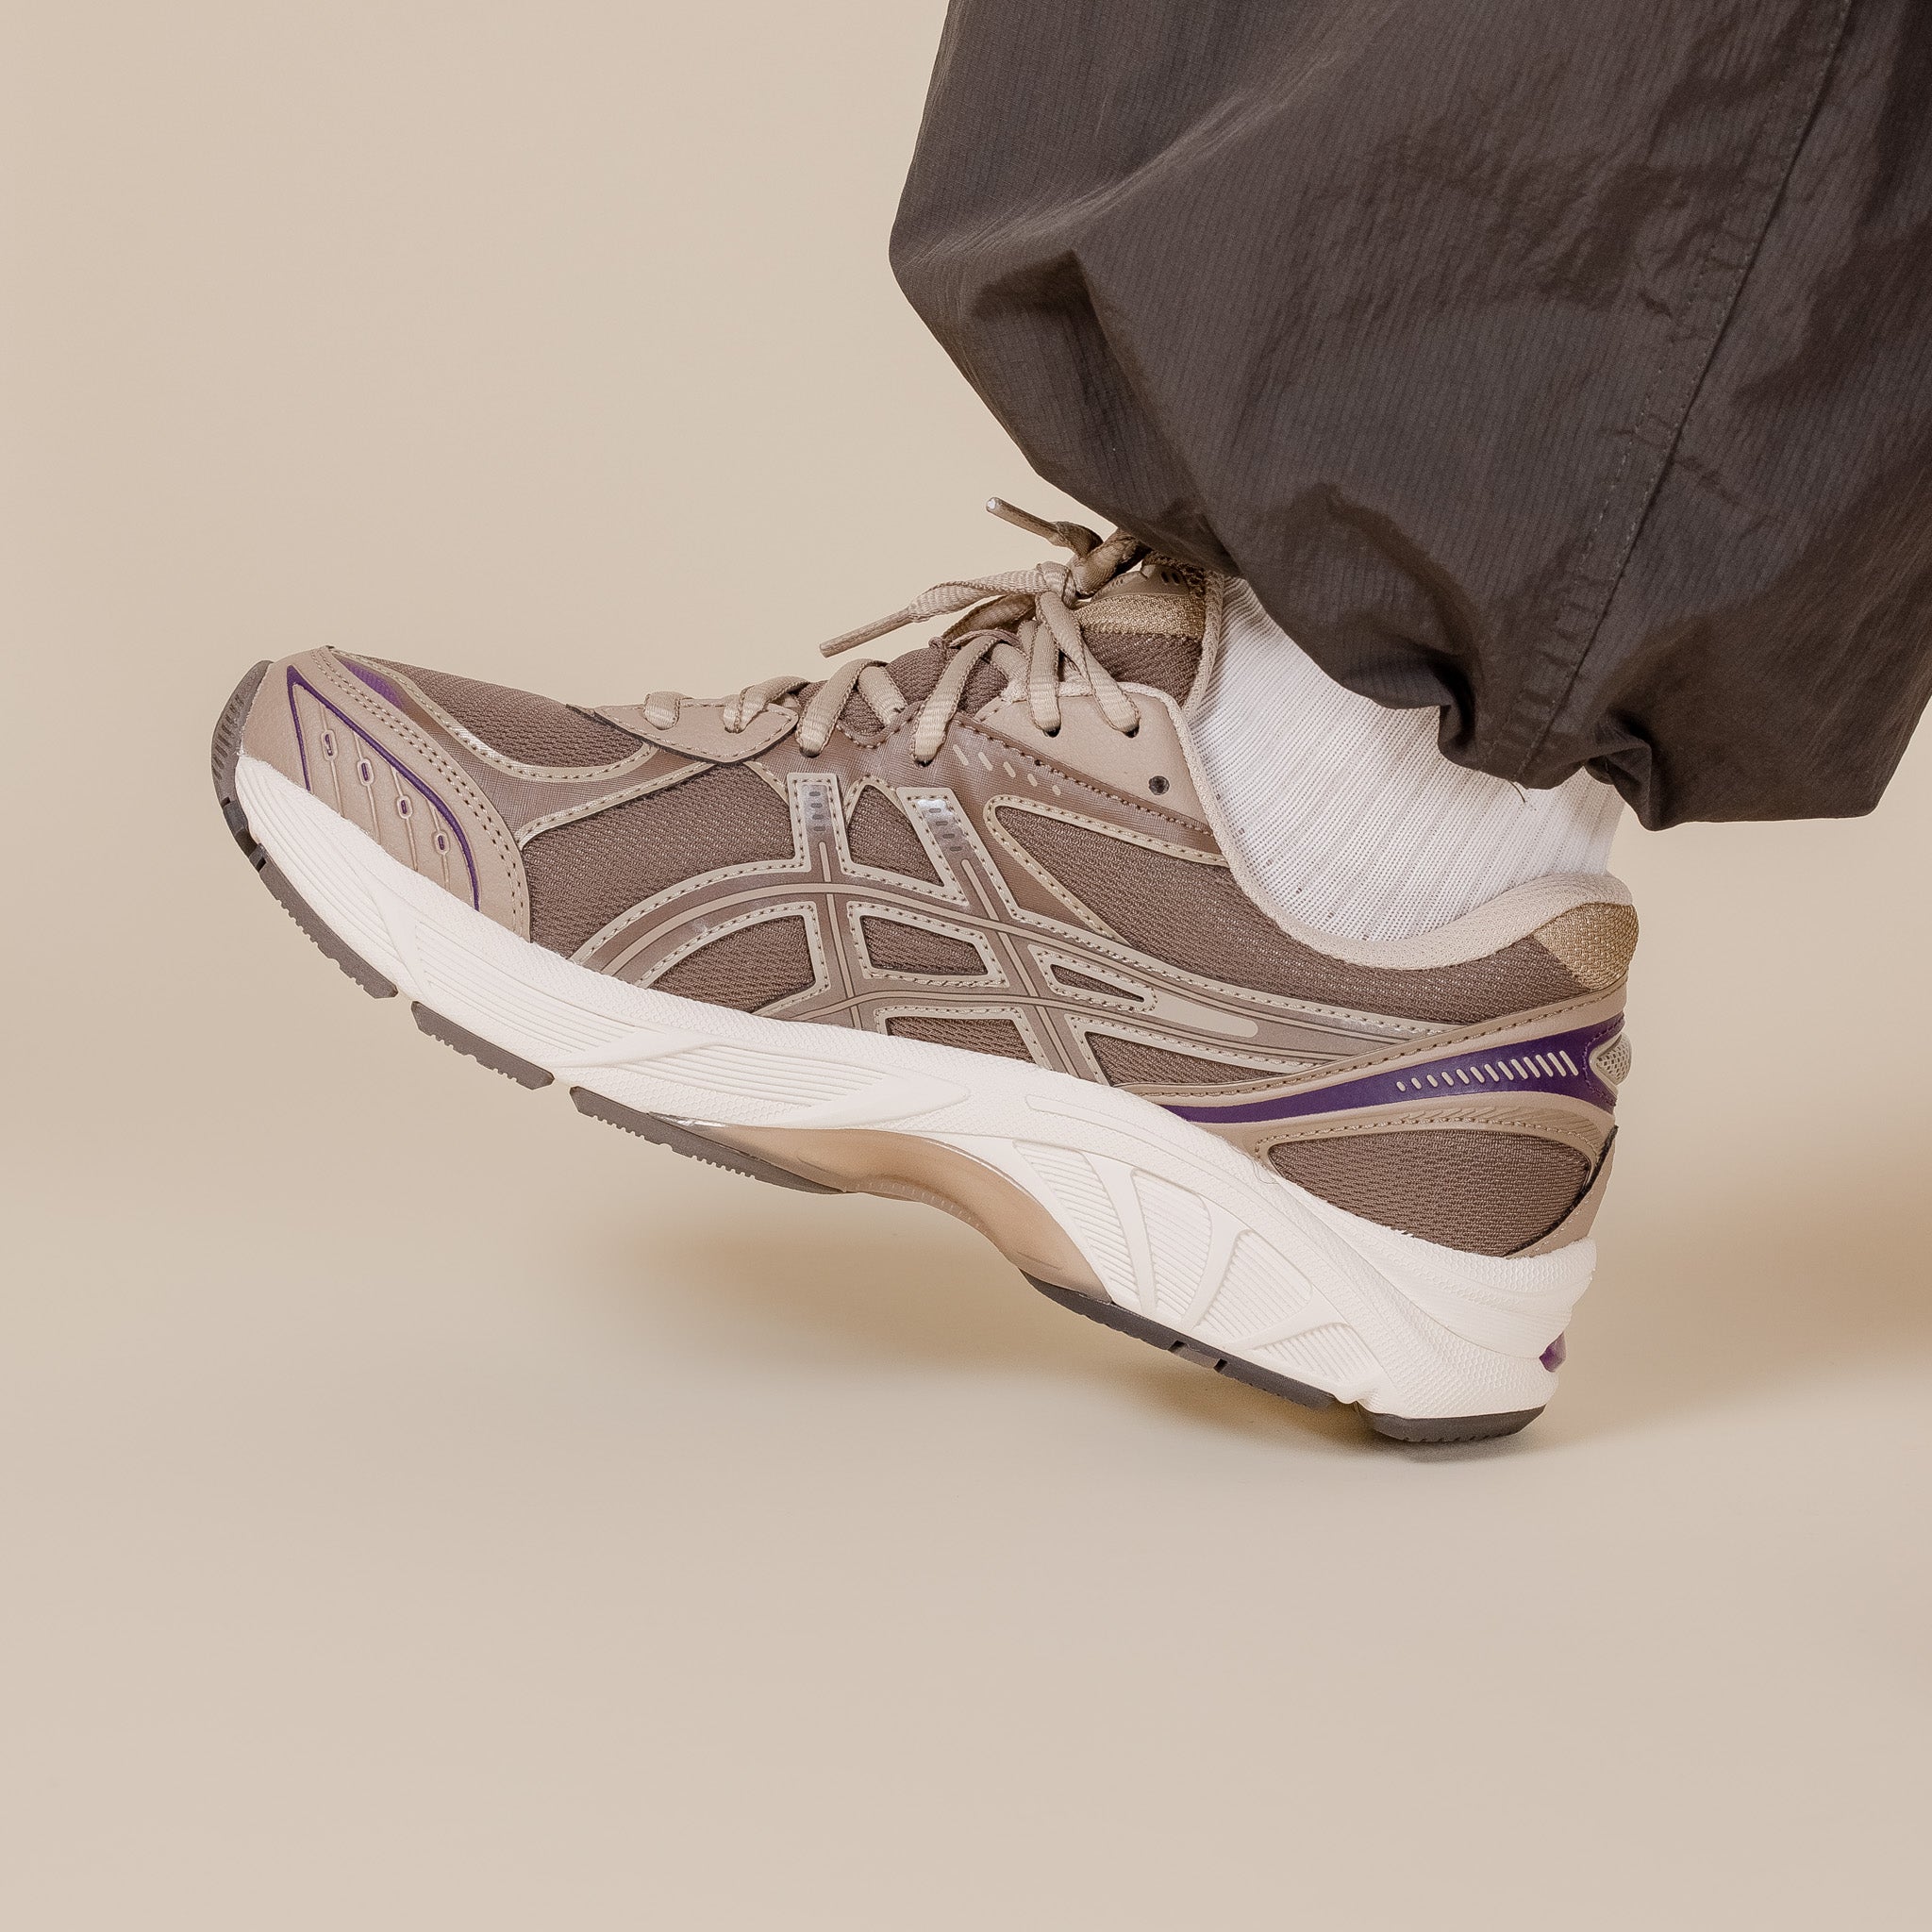 Style #: 1203A320.251 ASICS - GT-2160 - Dark Taupe / Taupe Grey "asics gt2160"